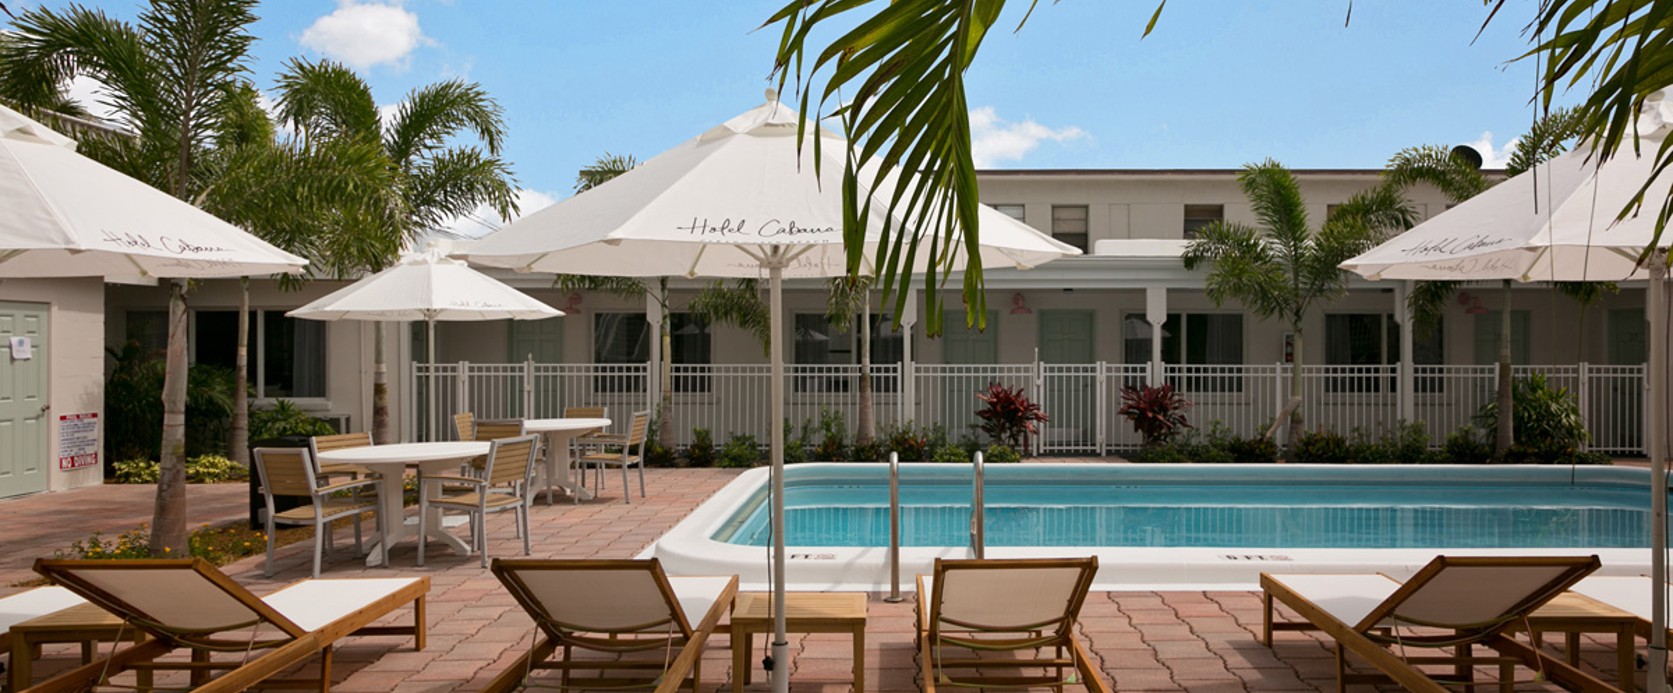 Hotel Cabana Clearwater sees 114% increase to organic traffic